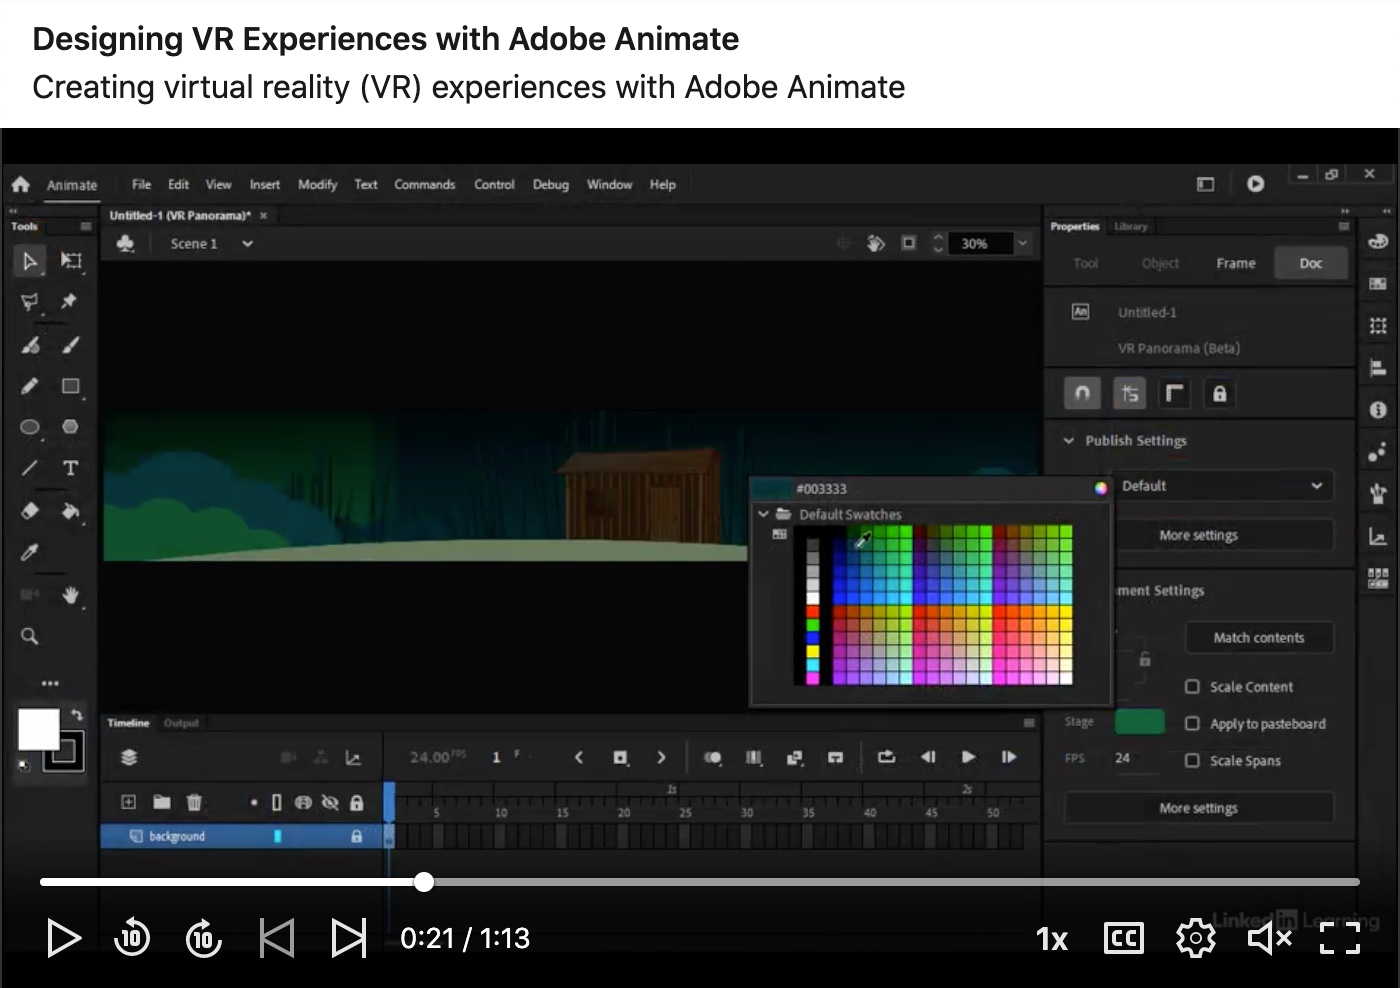 Designing VR Experiences with Adobe Animate